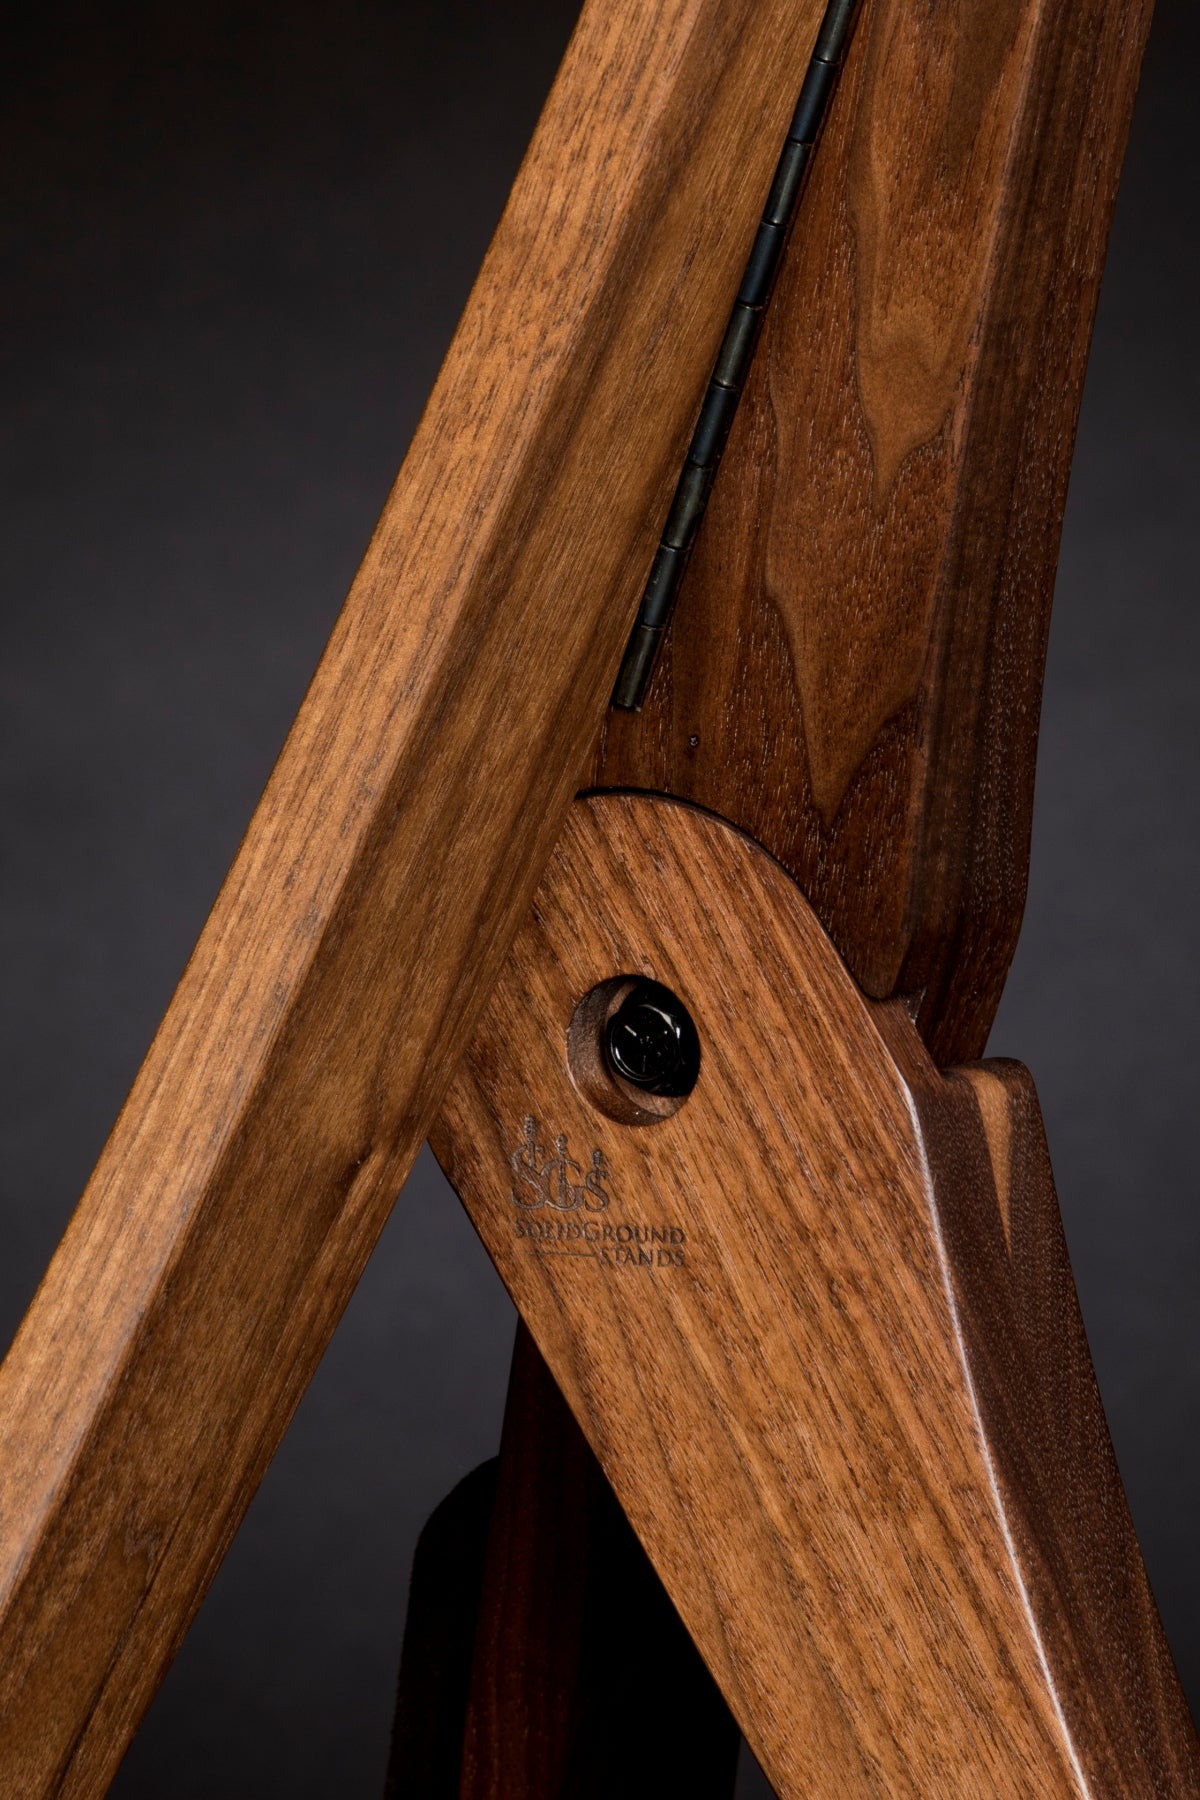 Folding walnut wood guitar floor stand joinery detail image